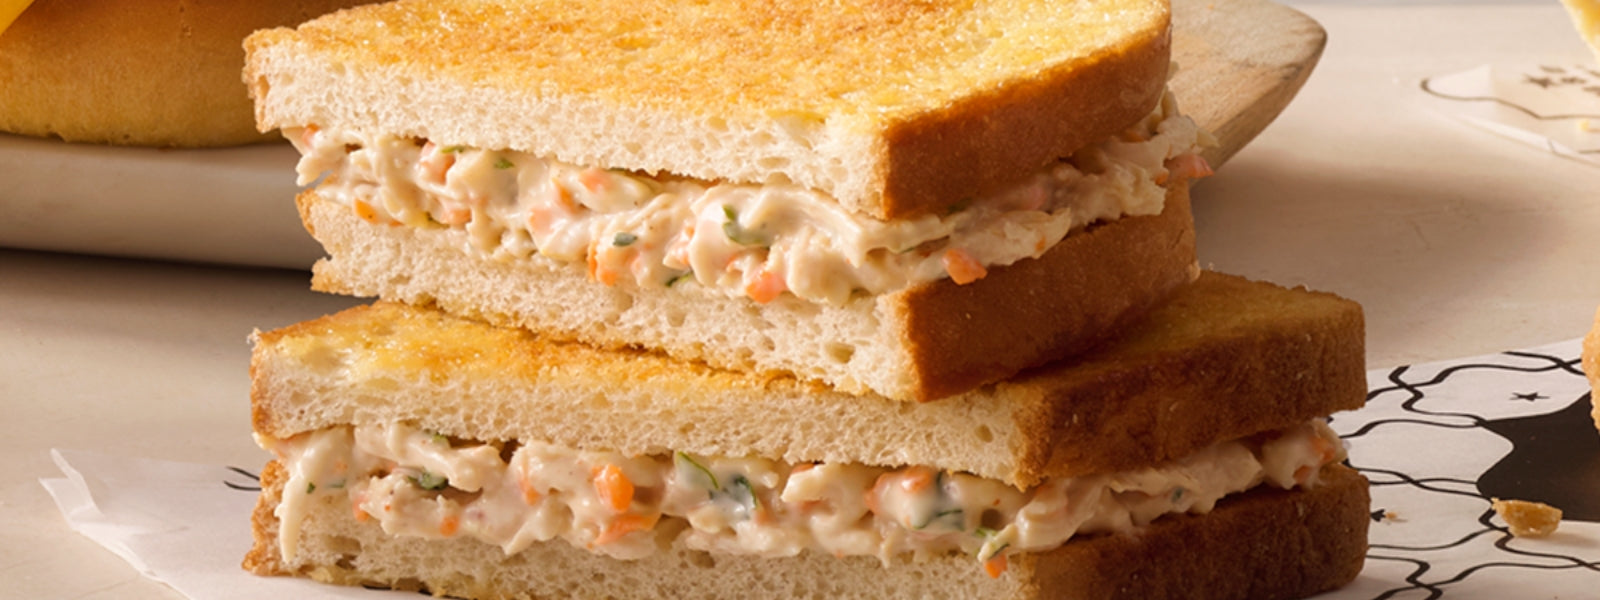 Quick & Delicious Chicken Mayo Sandwich using microwave